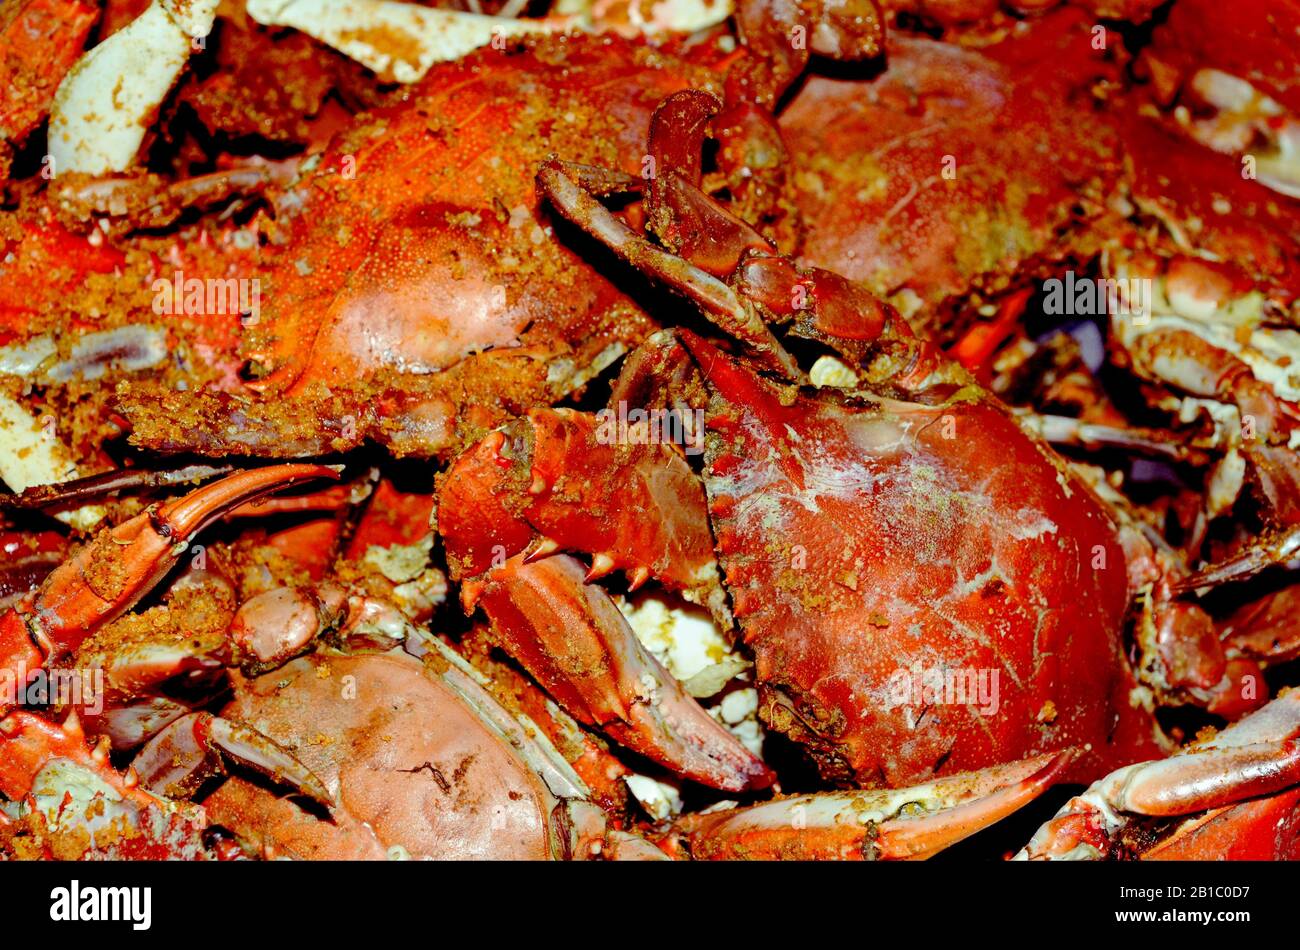 SEA FEAST: These red crabs are served up hot at a Maryland seafood festival. Stock Photo